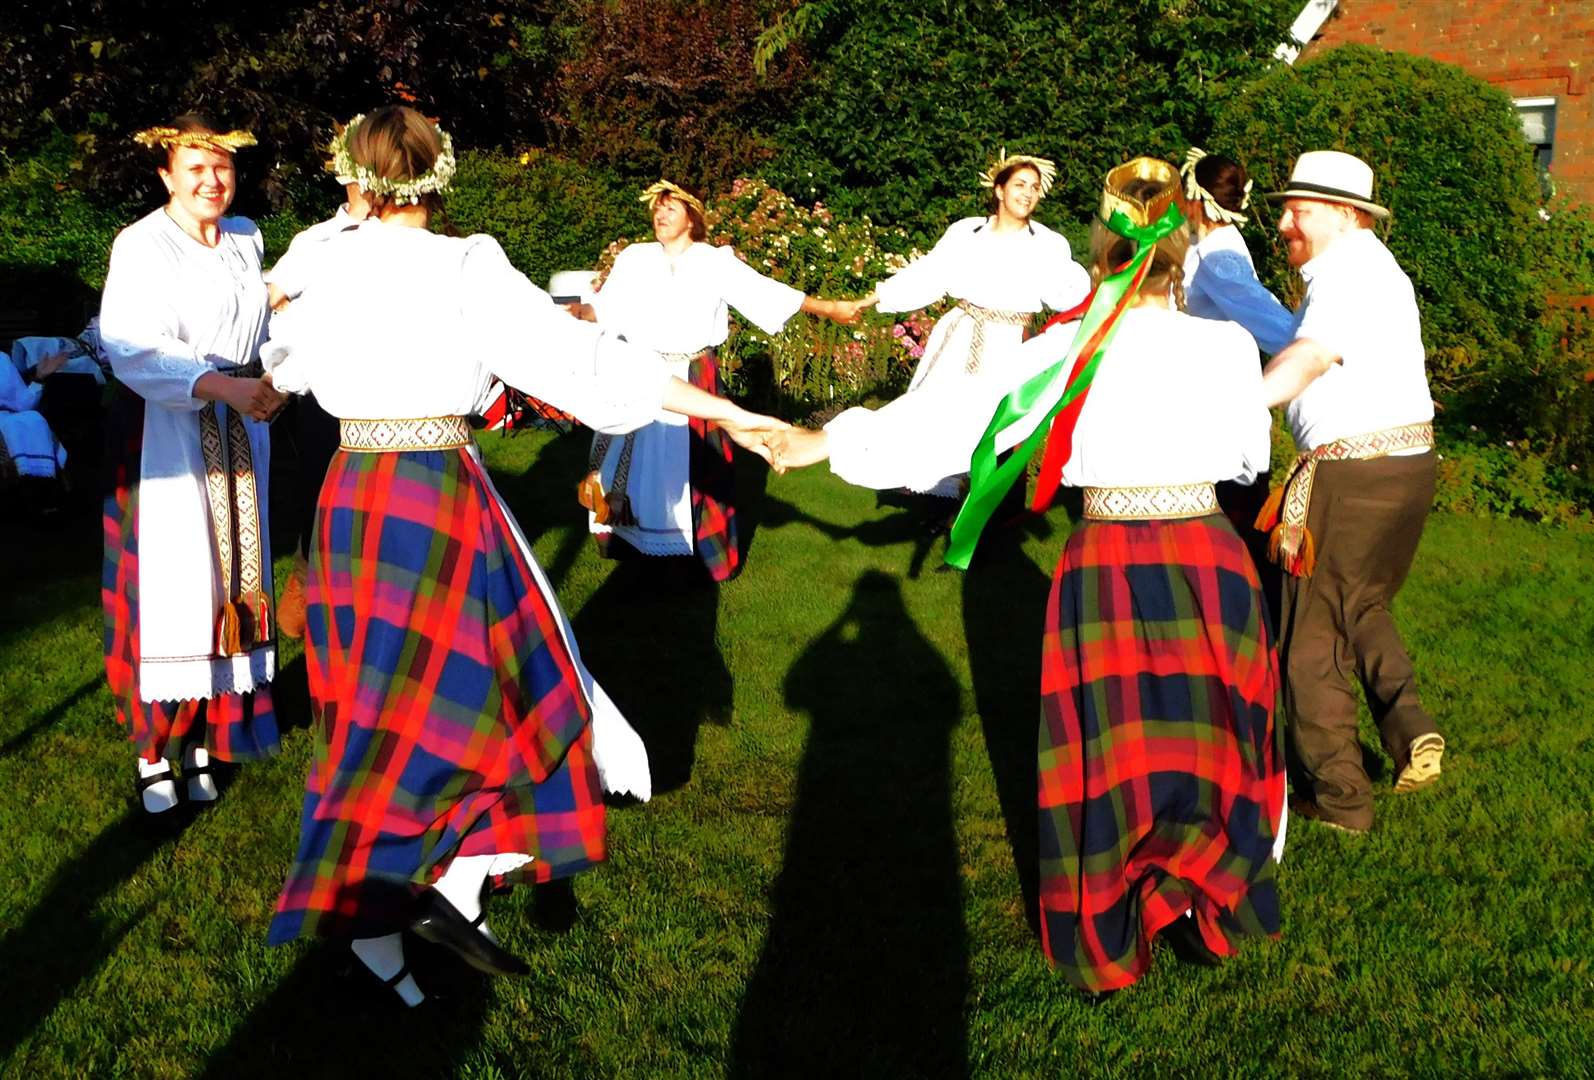 Lithuanian Dancers provided entertainment at the fundraiser